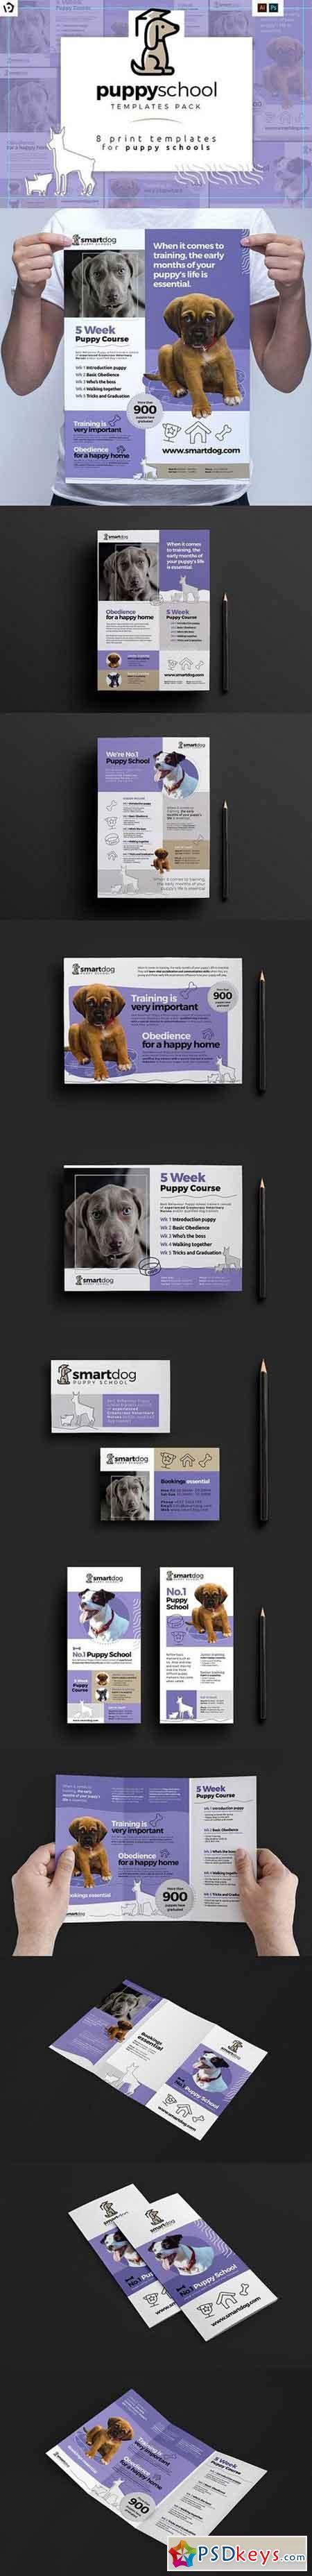 Puppy School Templates Pack 1199562